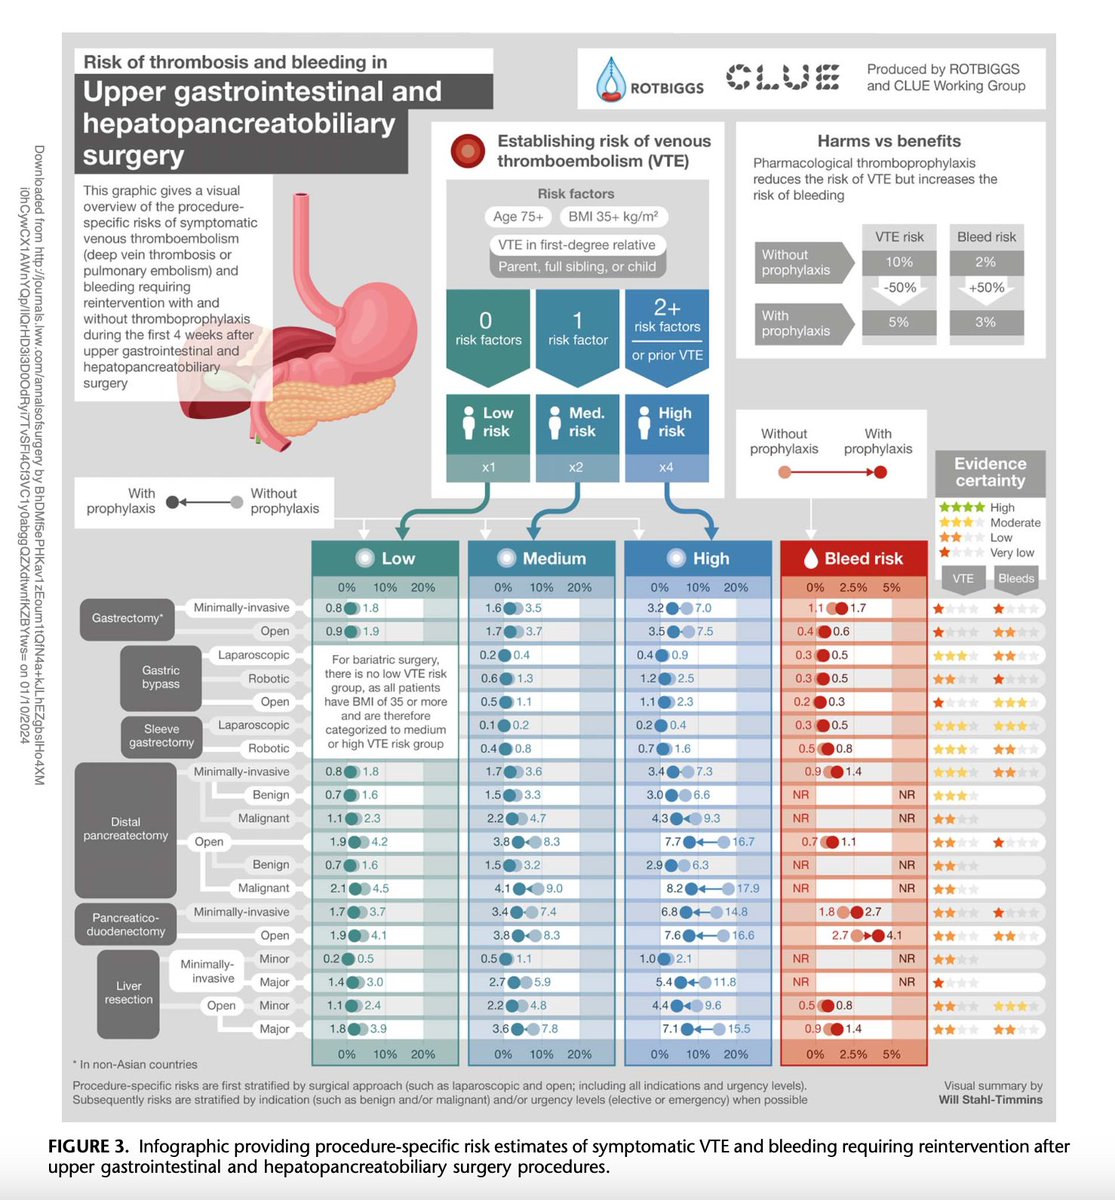 🔥 @AnnalsofSurgery today published the final  version of general abdominal, #colorectal, #HPB & upper-GI surgery results of #ROTBIGGS project that provides procedure specific risks of #VTE & #bleeding

journals.lww.com/annalsofsurger…

🌟 Includes infographics to guide practice 
 
#EBM